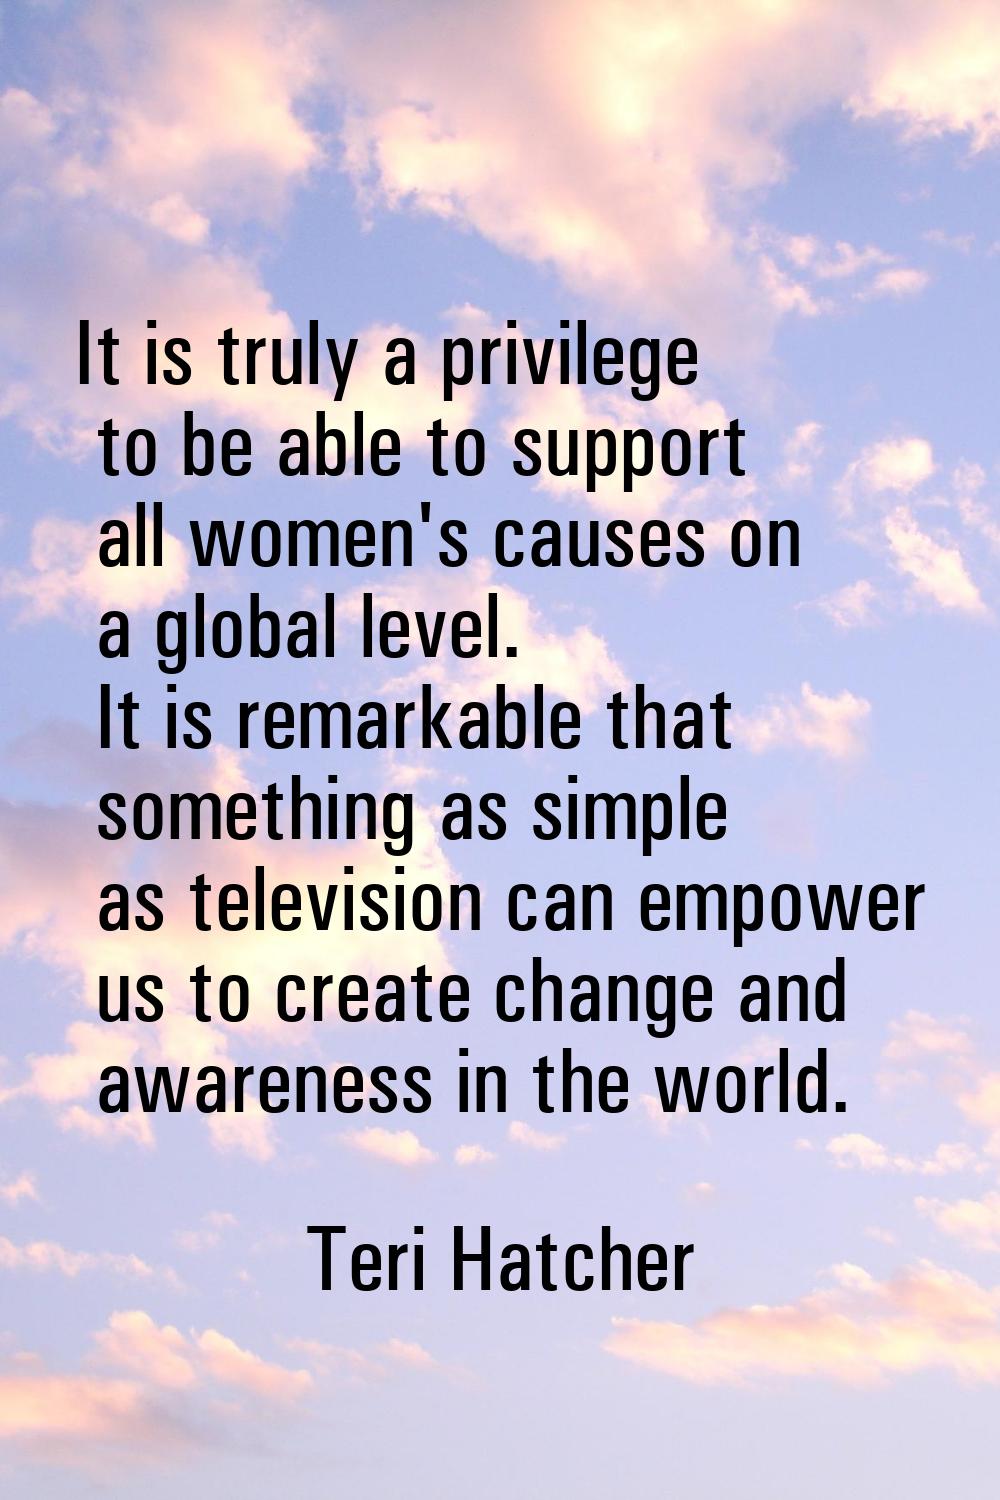 It is truly a privilege to be able to support all women's causes on a global level. It is remarkabl